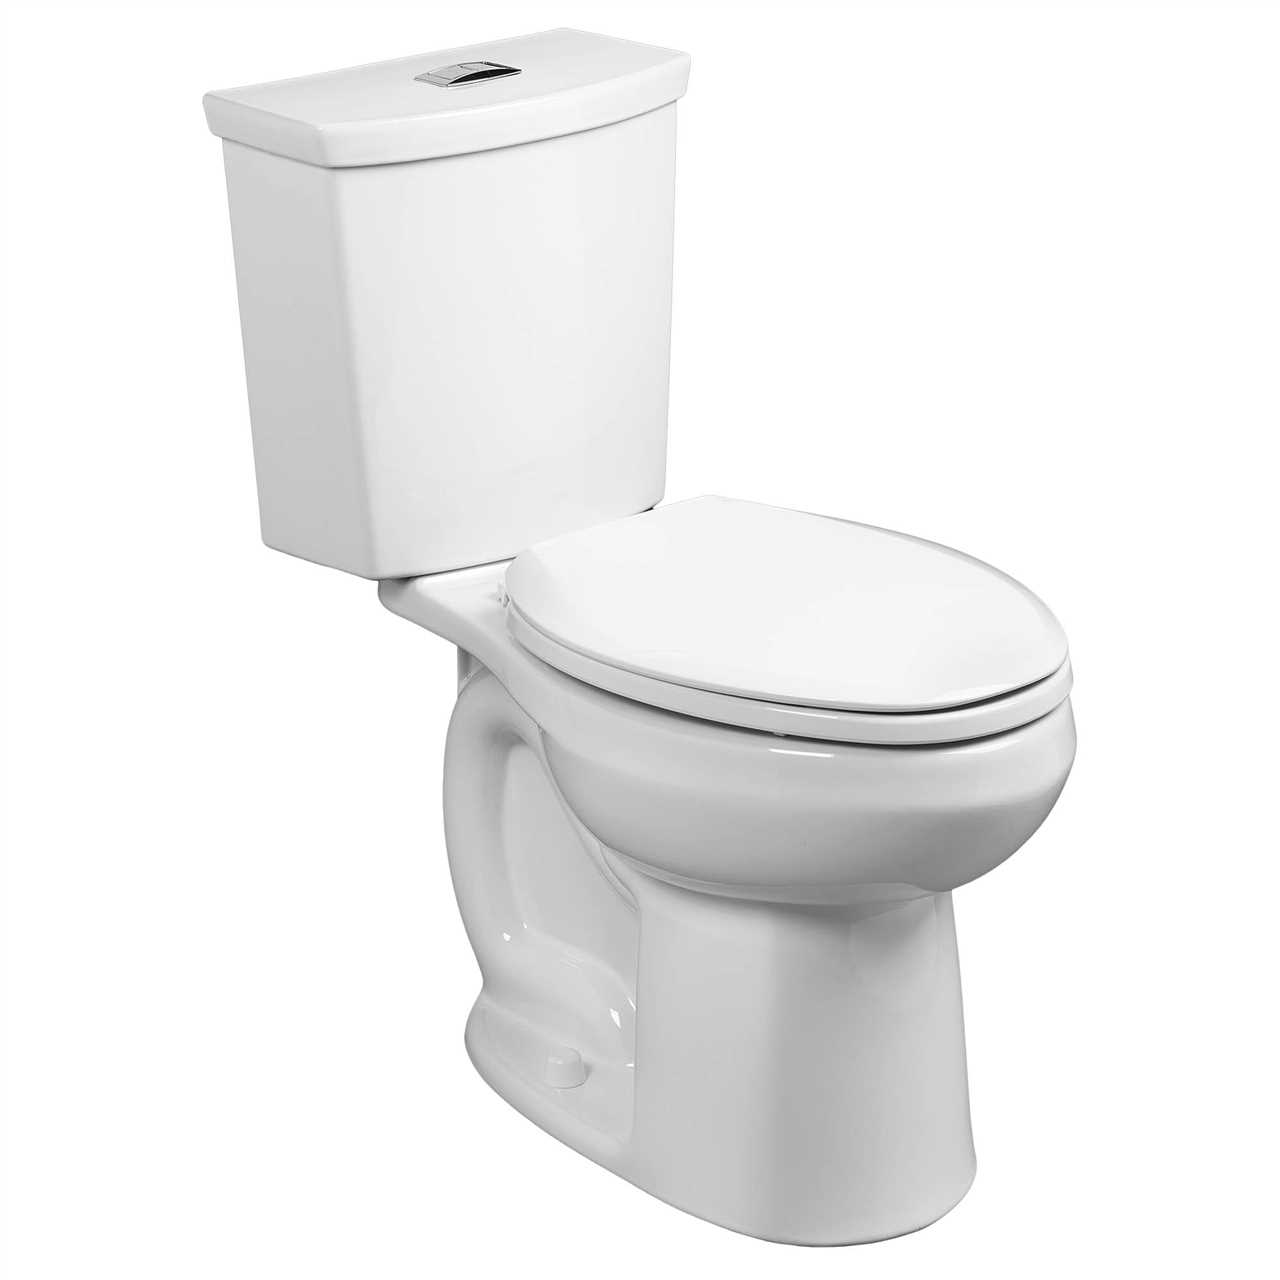 Benefits of using a Dual Flush Toilet